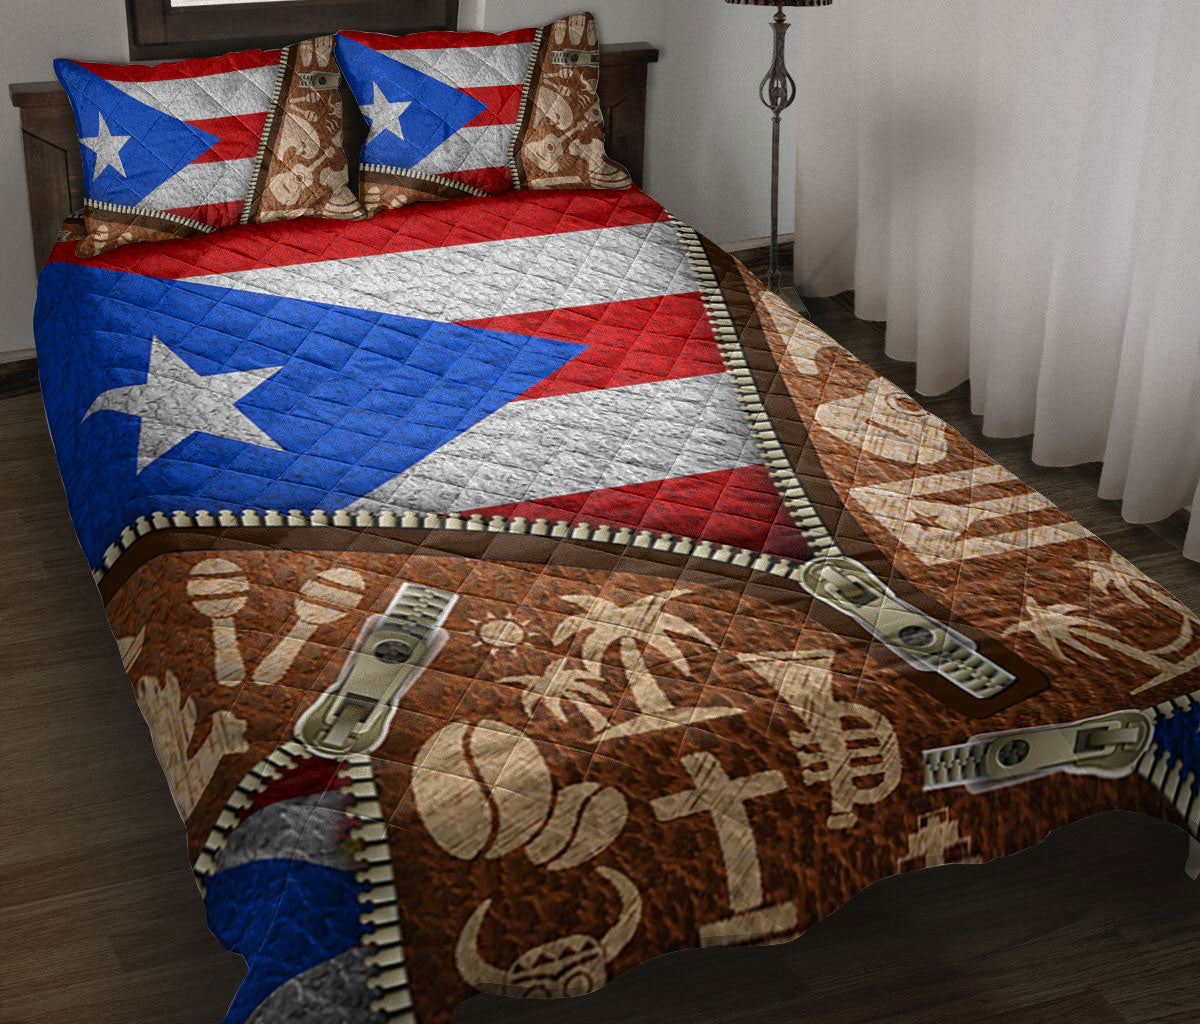 Ohaprints-Quilt-Bed-Set-Pillowcase-Puerto-Rico-Flag-Puerto-Rican-Striped-Star-Brown-Custom-Personalized-Name-Blanket-Bedspread-Bedding-1090-Throw (55'' x 60'')